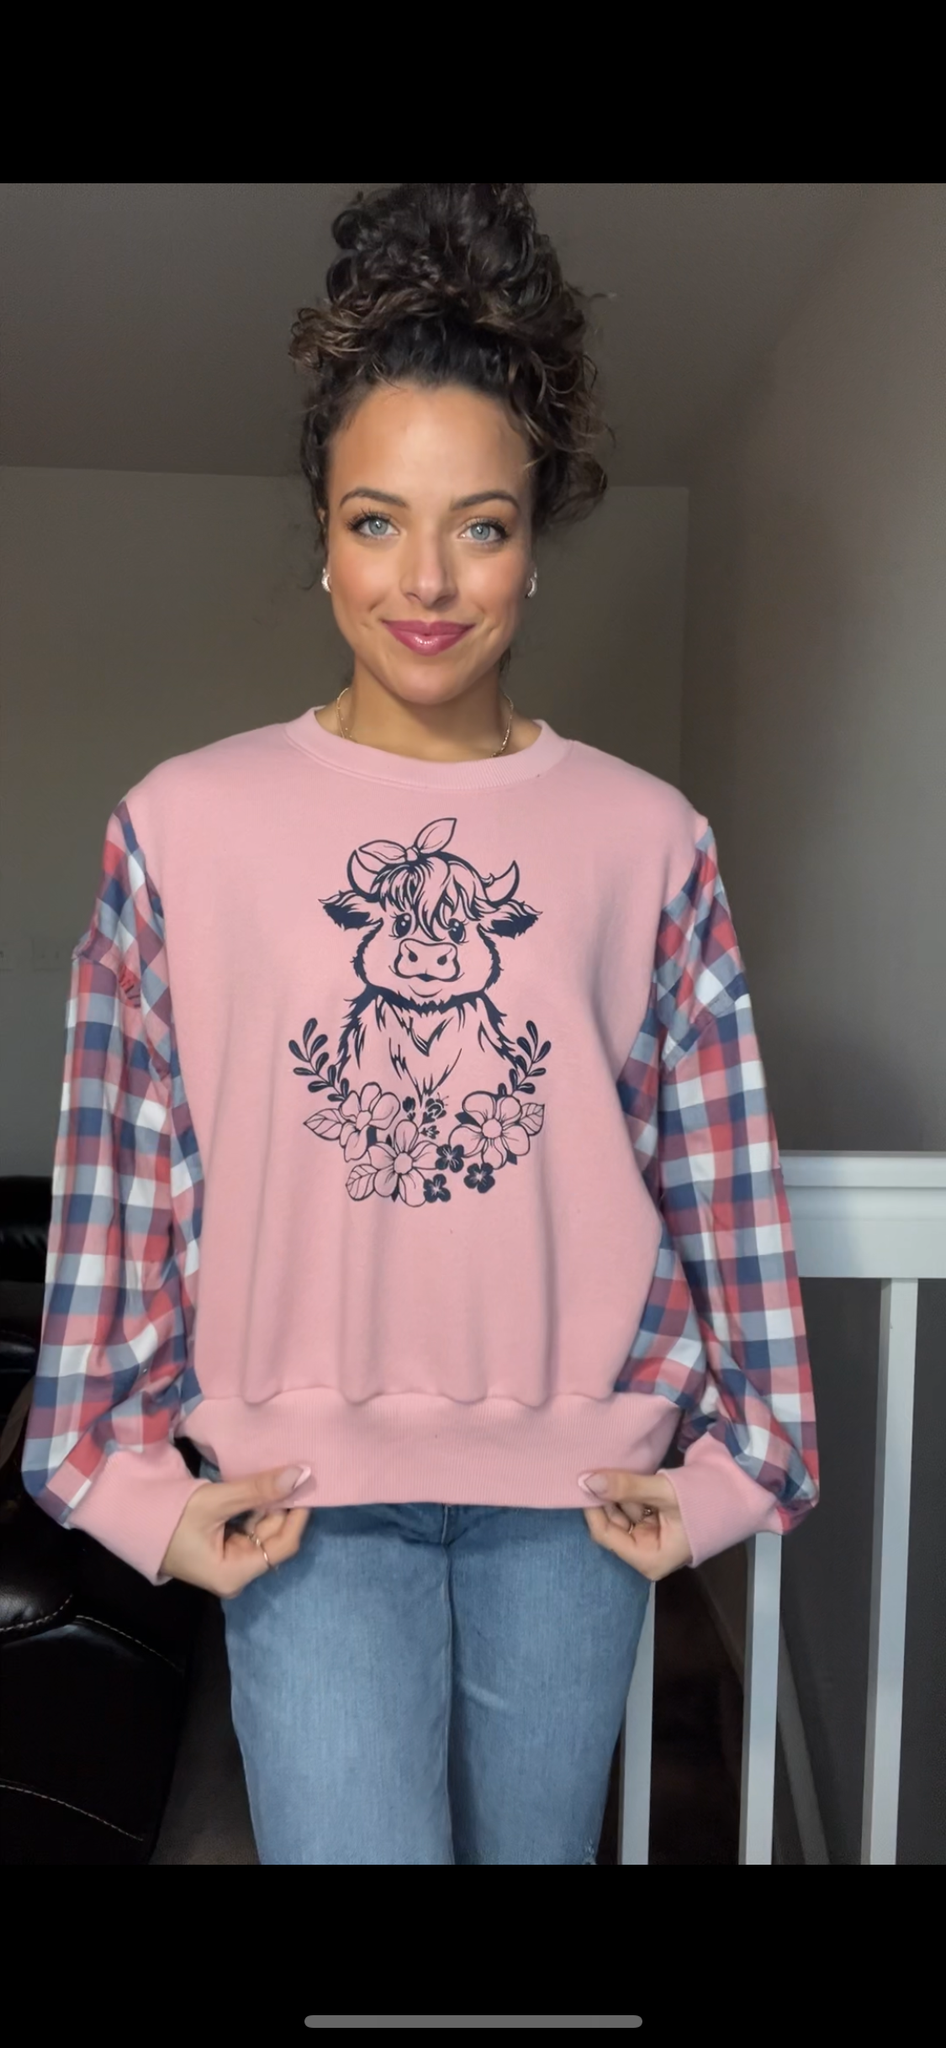 Upcycled Cow - women’s medium – thin sweatshirt with thin flannel sleeves ￼